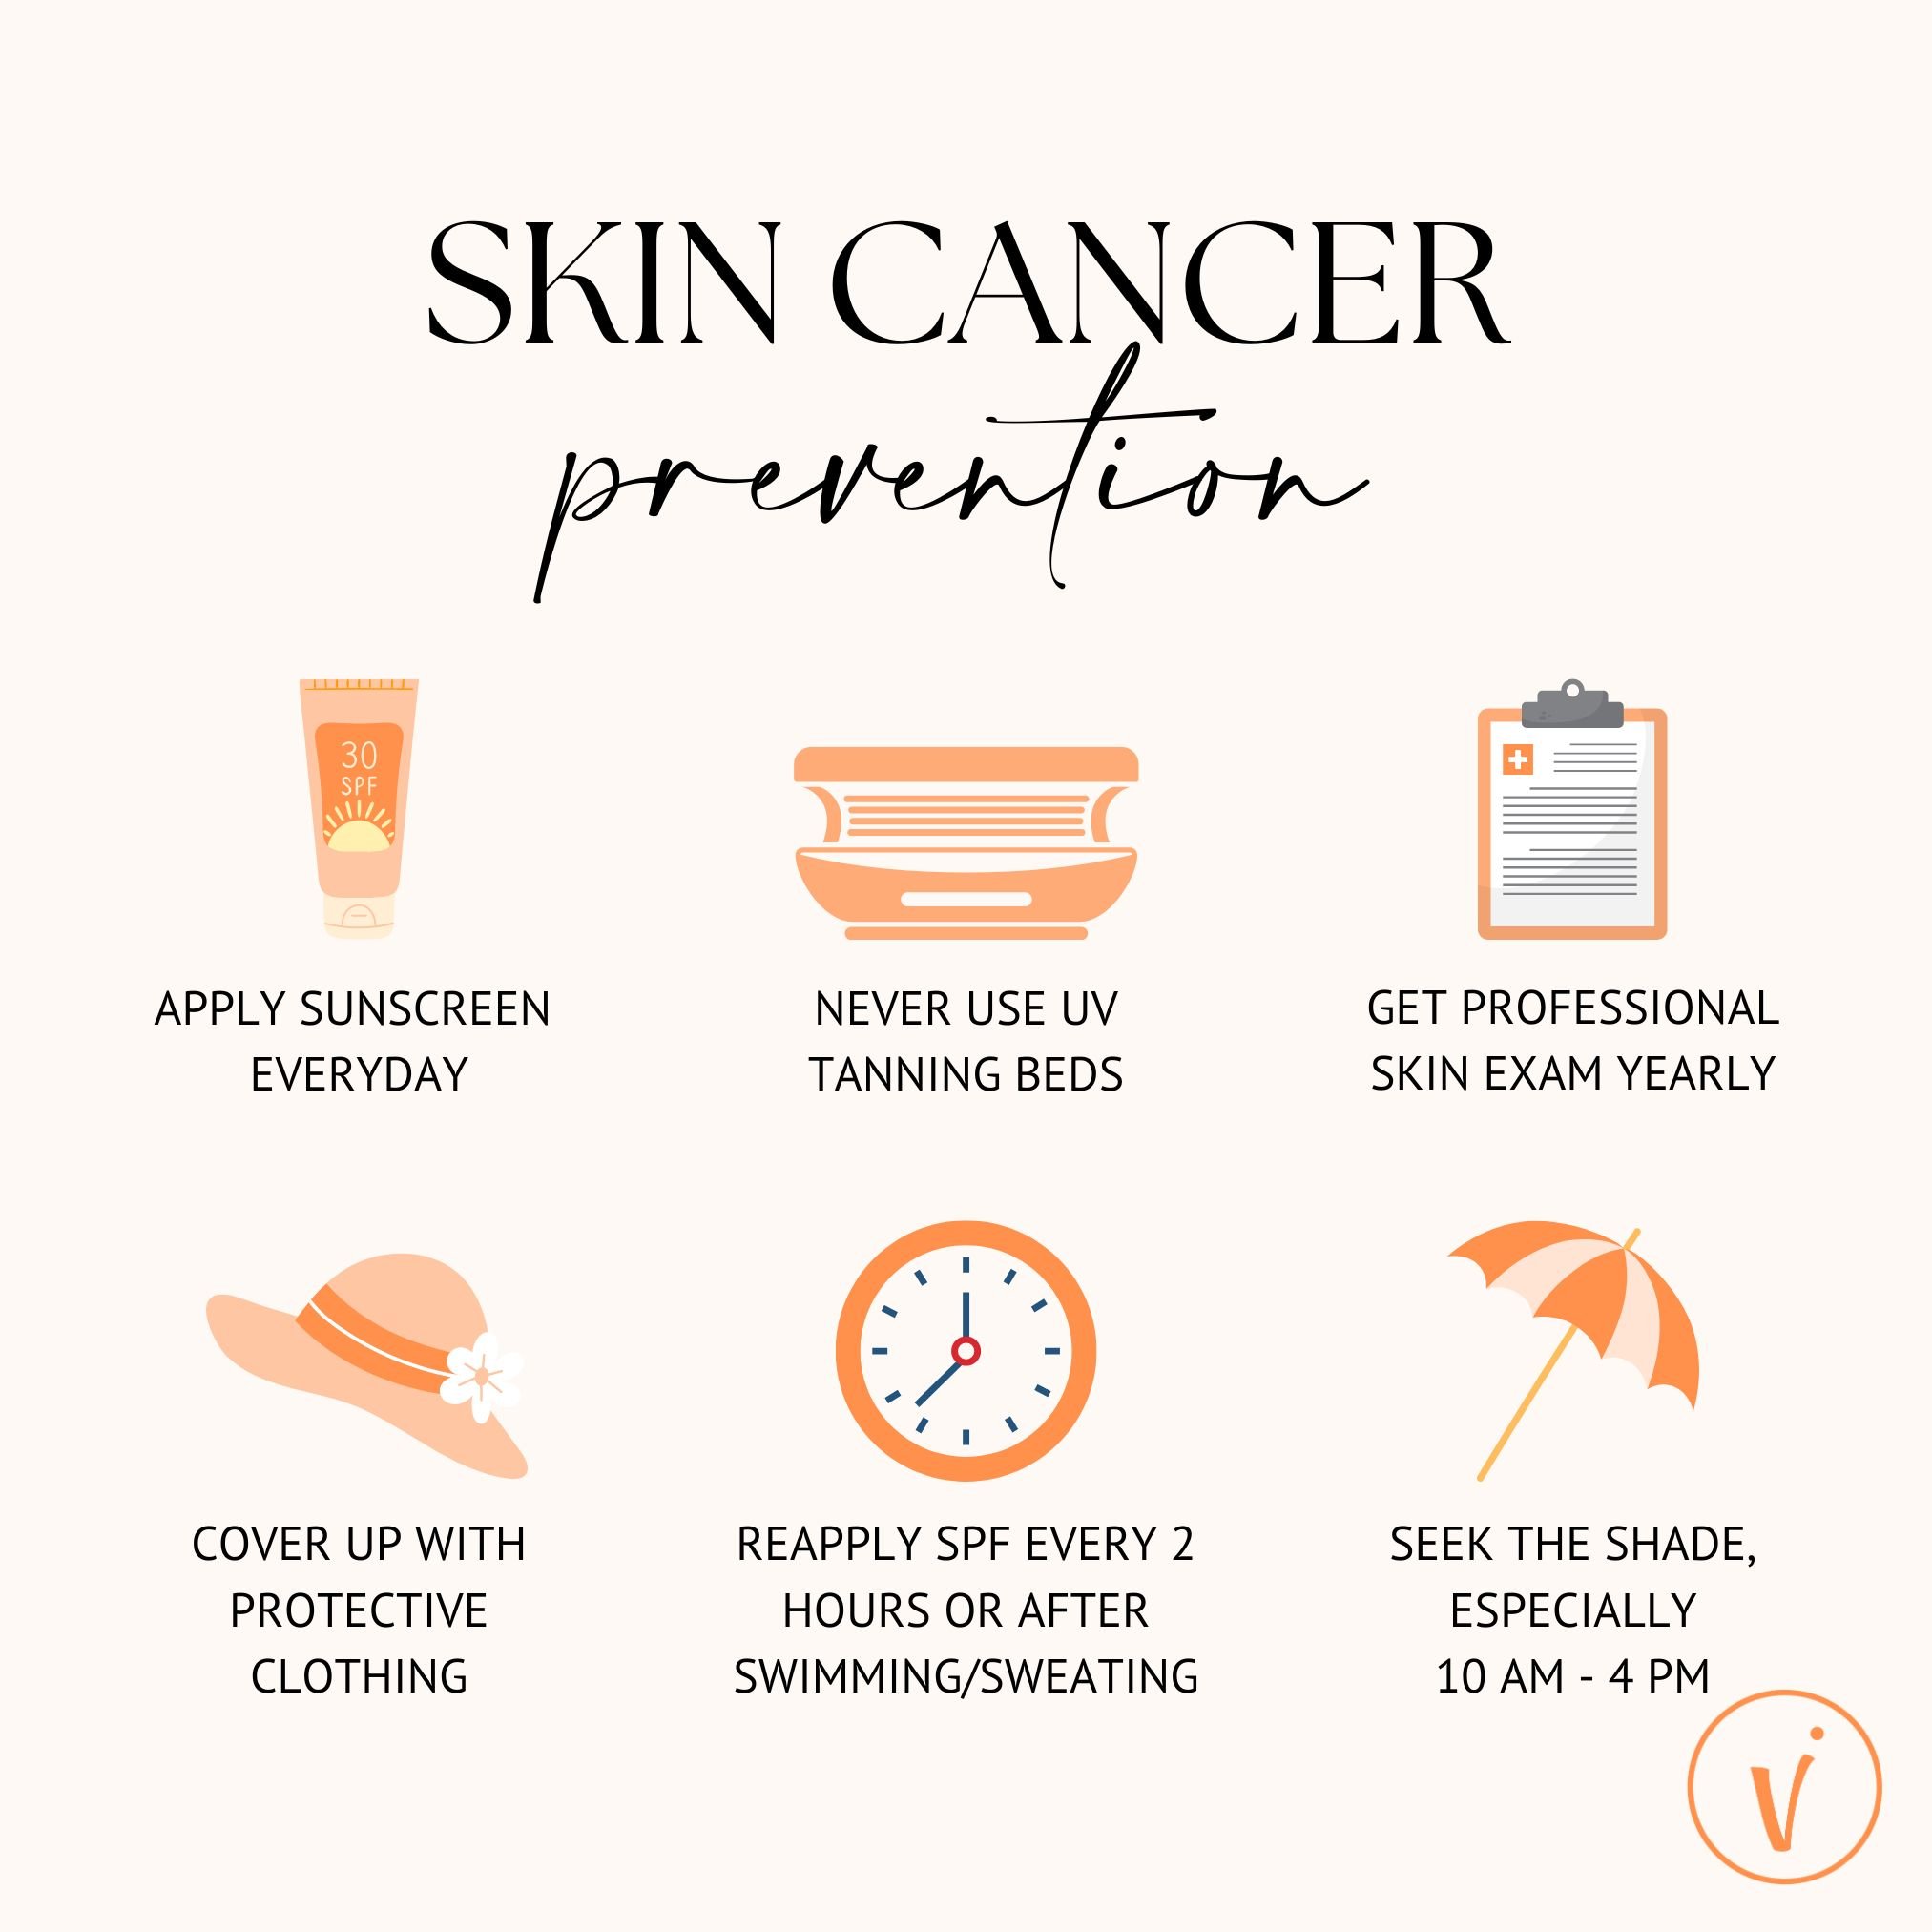 May is Skin Cancer Awareness Month! Here are a few tips to help you stay away from the sun's harmful UV rays!
☀️ Apply sunscreen every single day
☀️ Never use UV tanning beds
☀️ Get a professional skin exam by a dermatologist yearly
☀️ Cover up with 